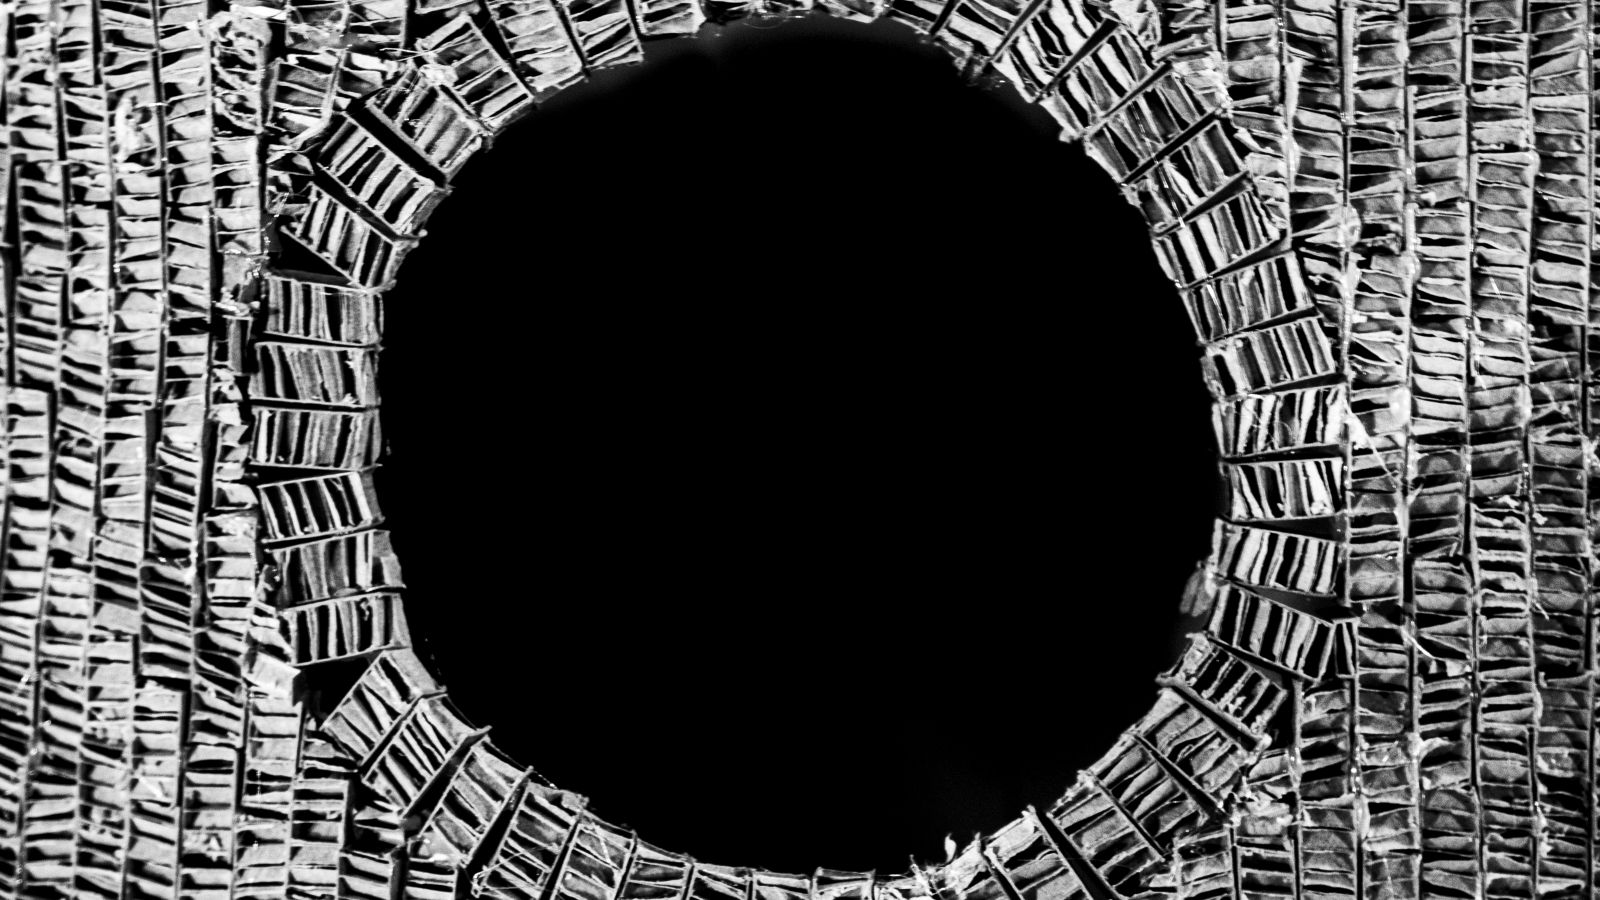 Black an white close up imageof a cardboard model with layered texture and a circle cut out in the middle